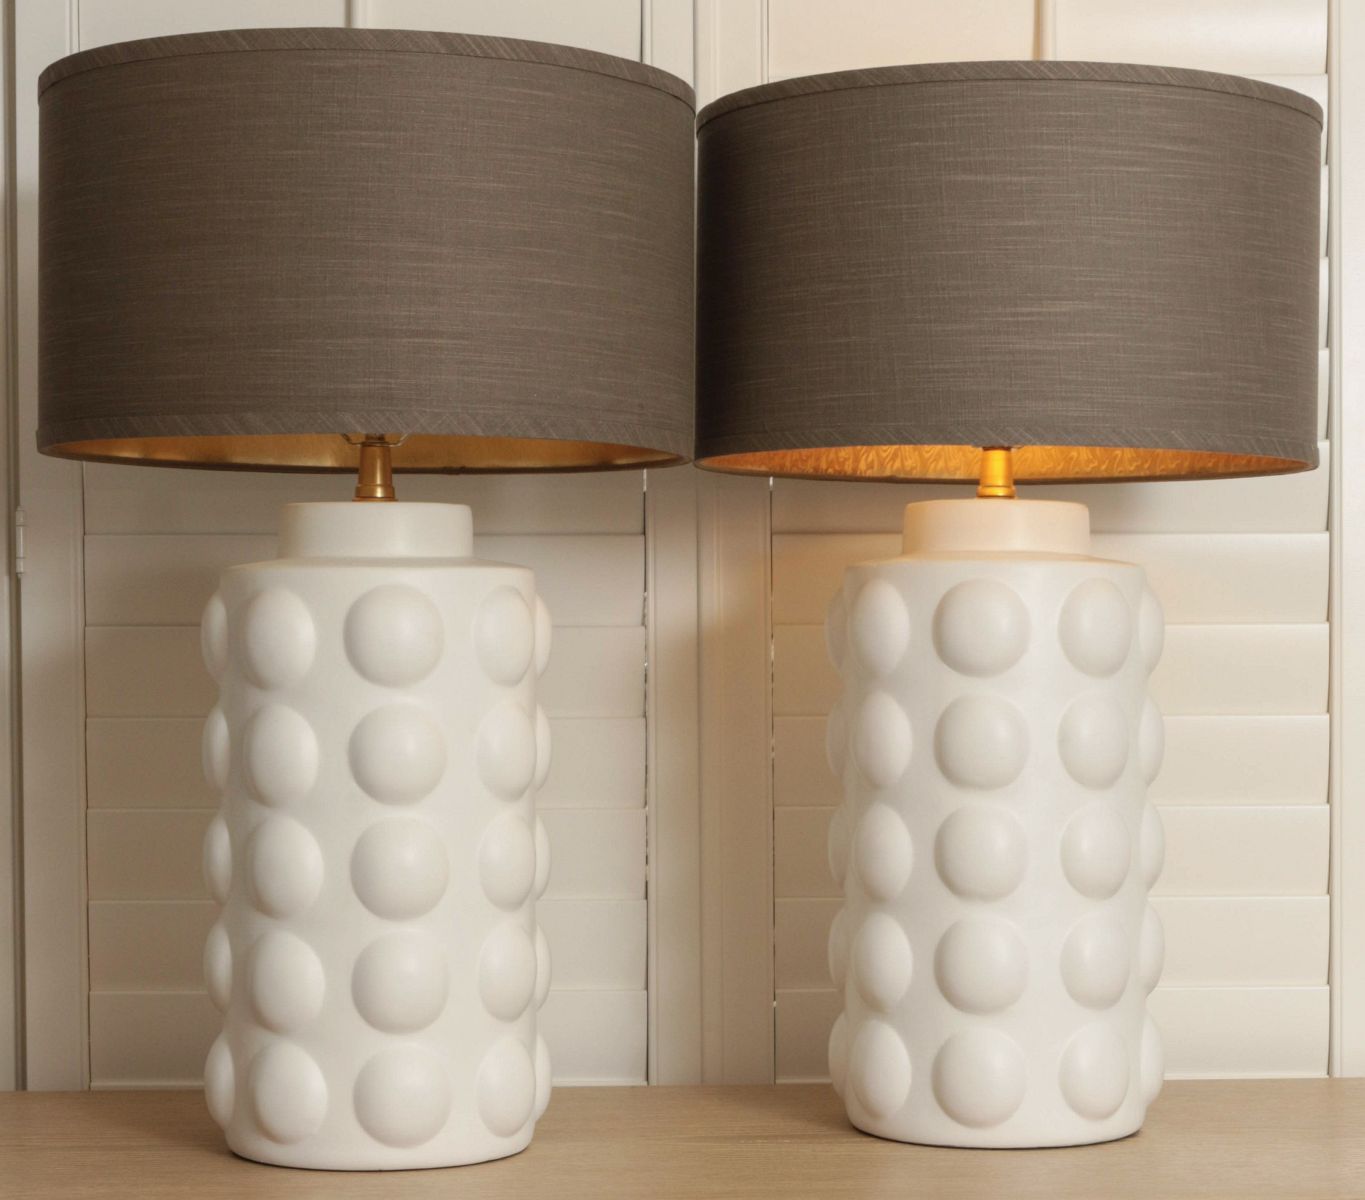 A PAIR CONTEMPORARY DESIGNER TABLE LAMPS